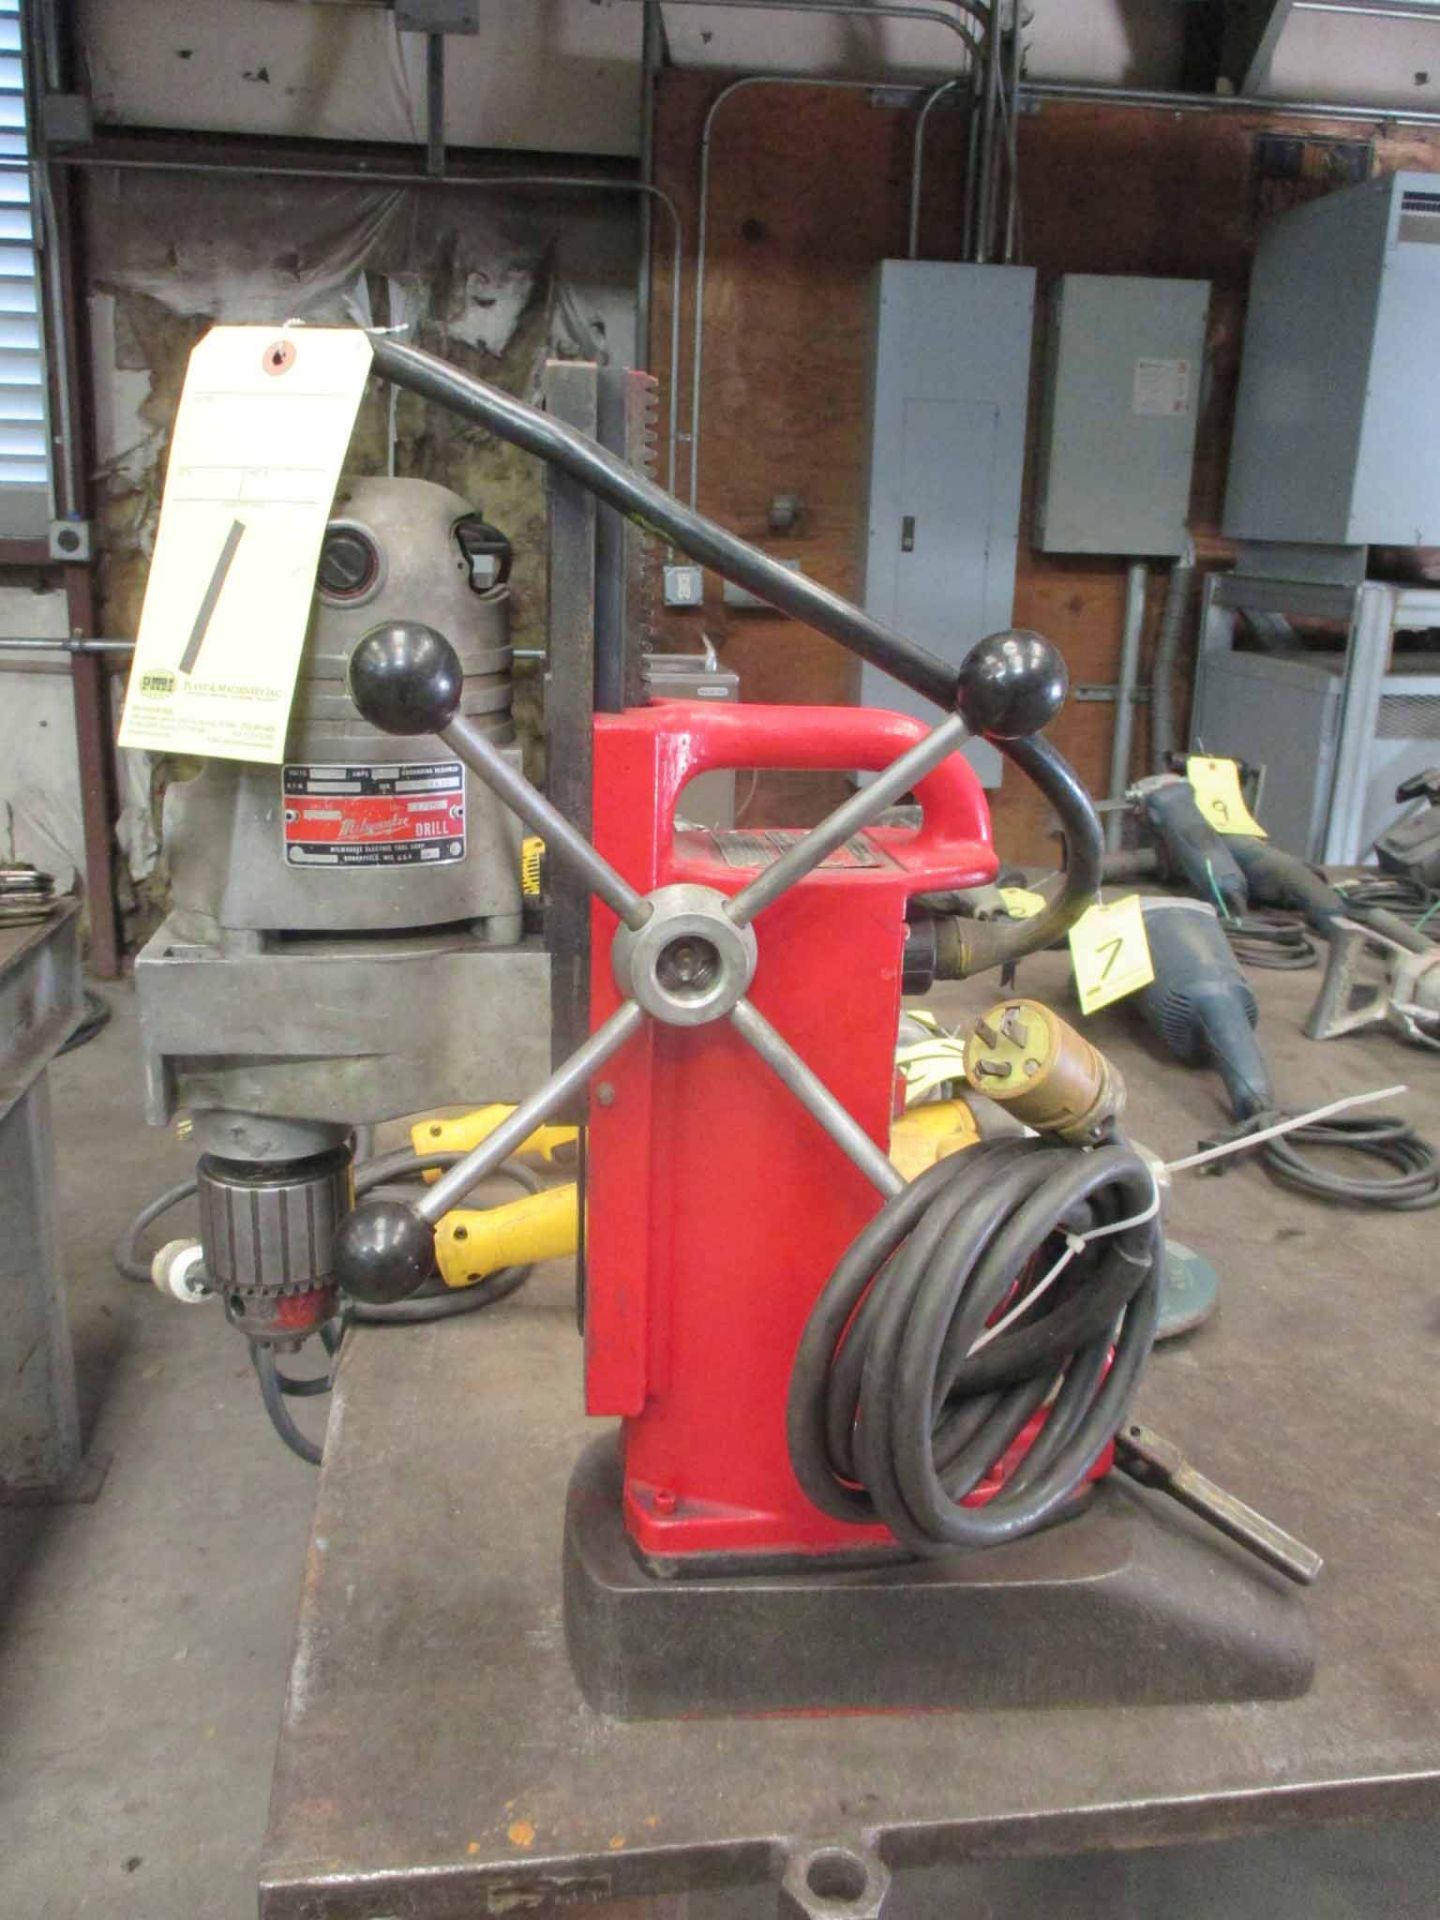 ELECTROMAGNETIC DRILL, MILWAUKEE, S/N 000502843